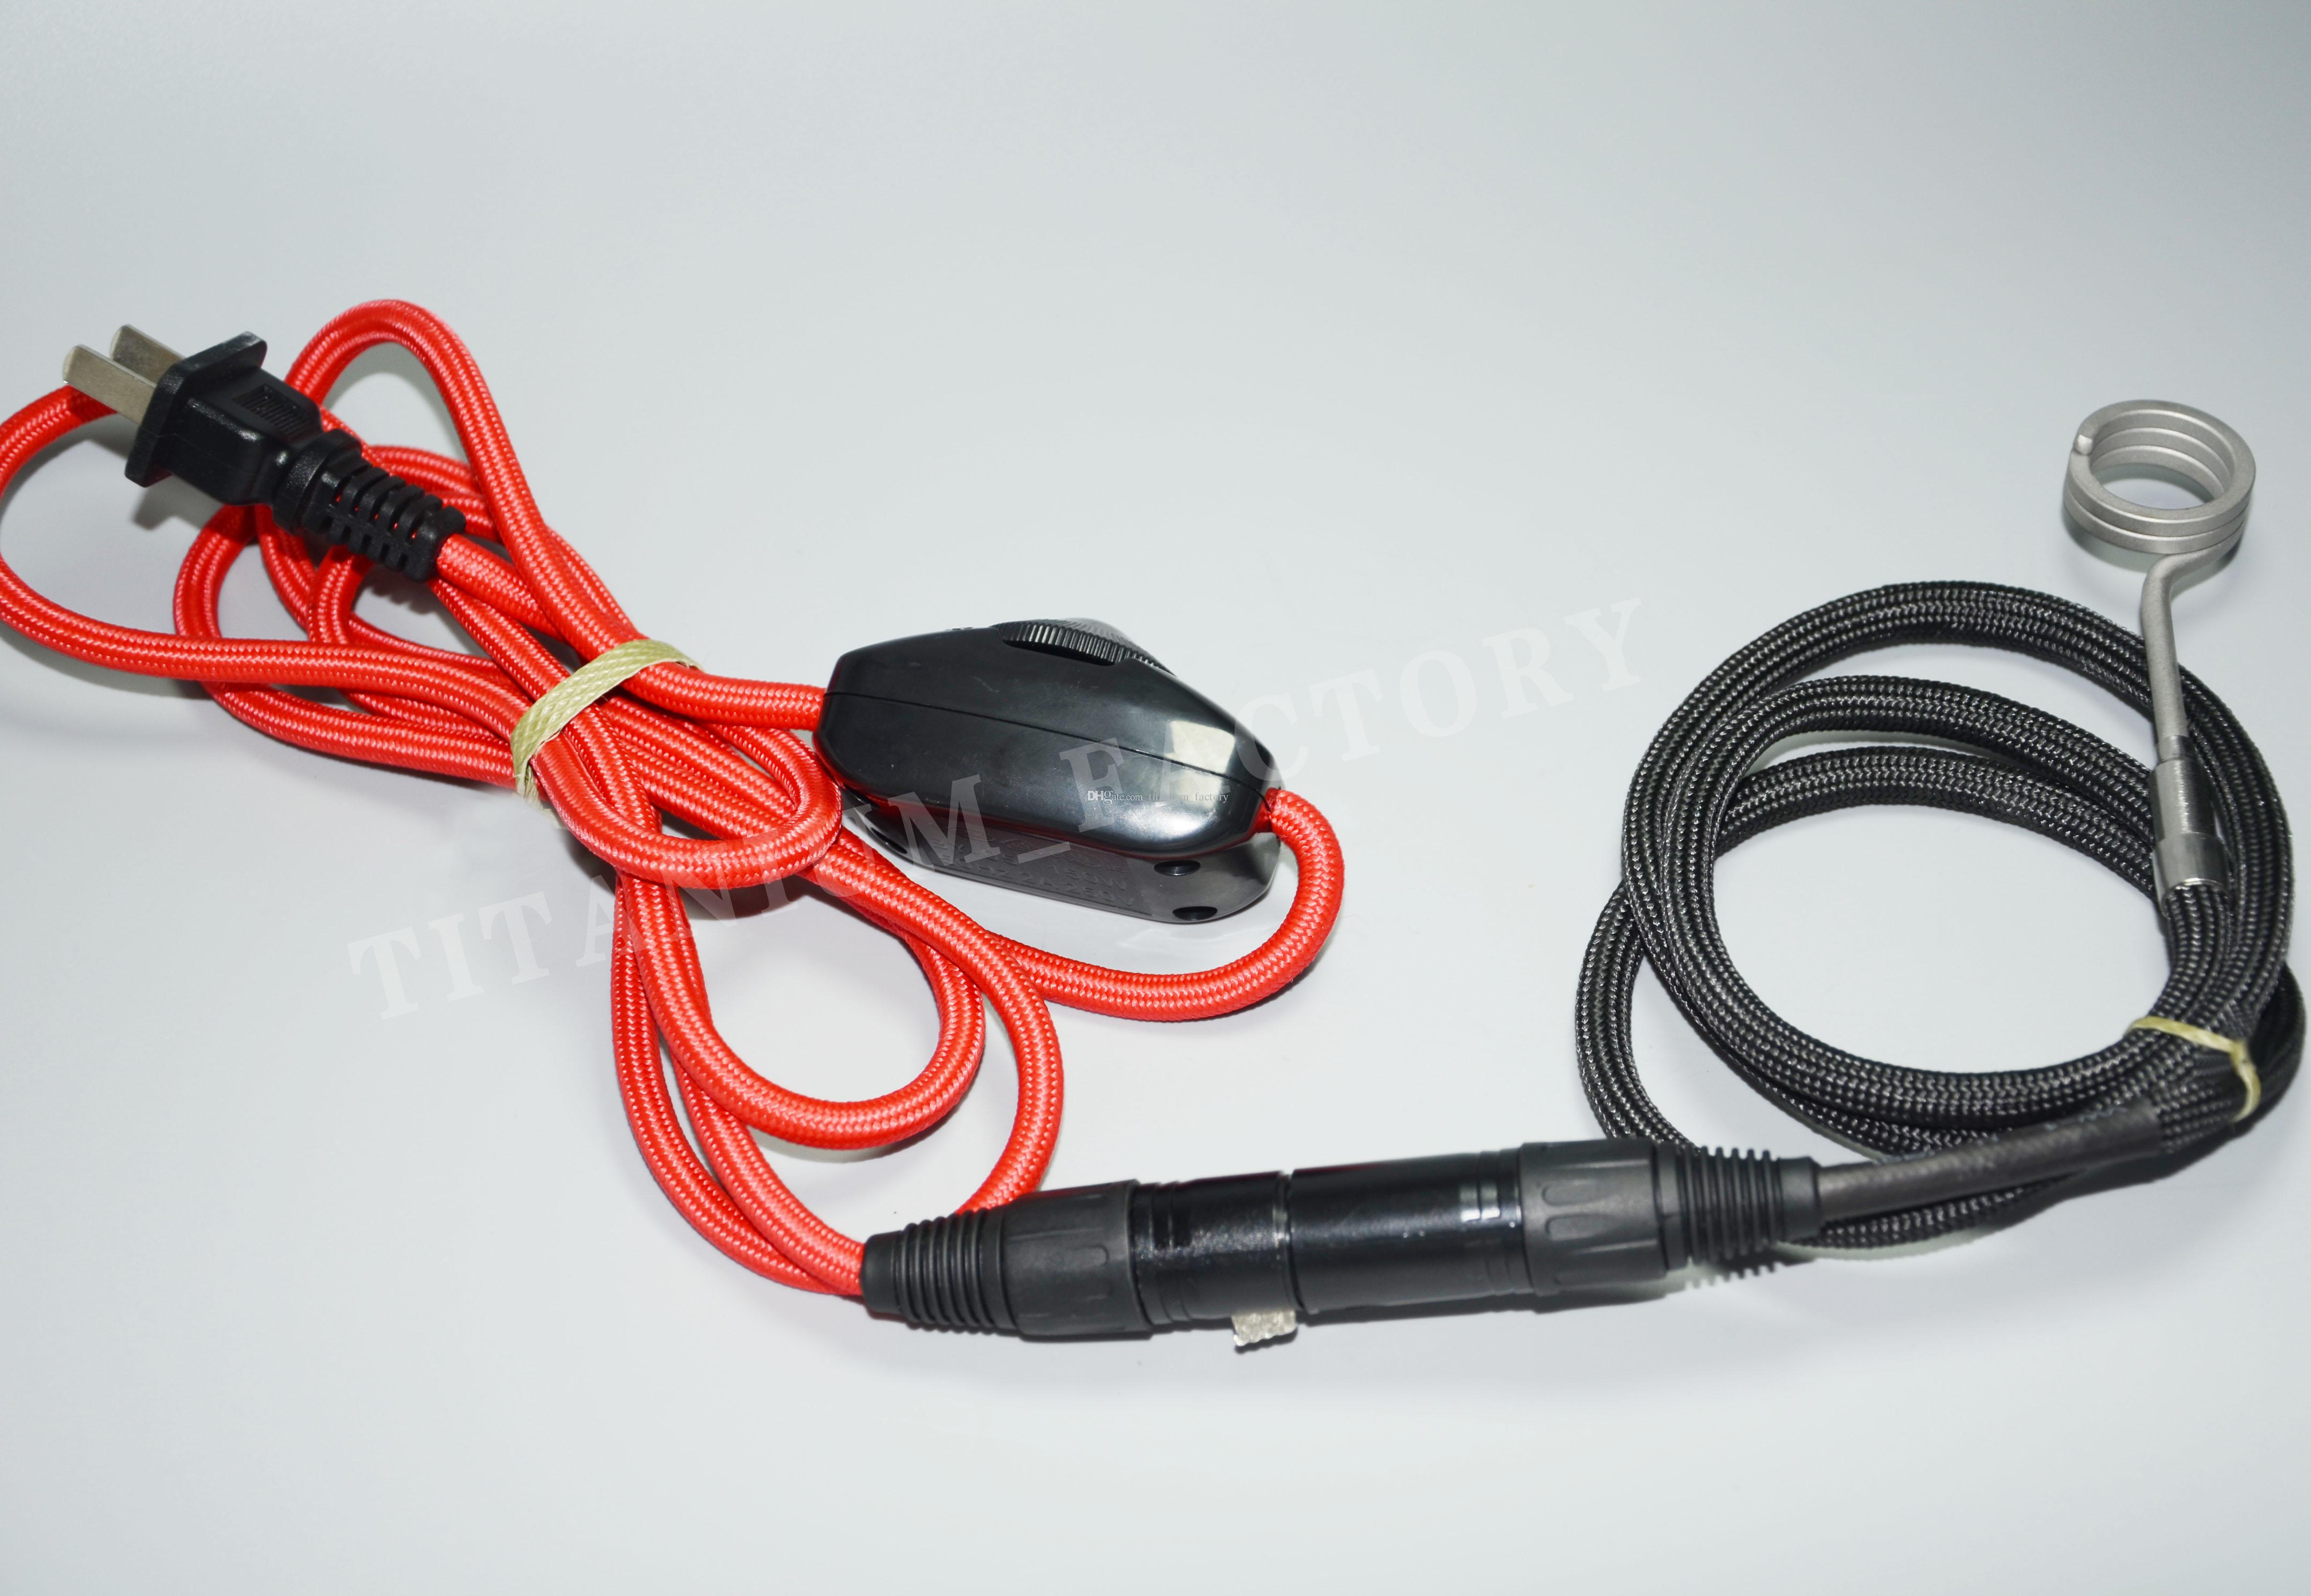 2018 Red Analog Xlr Connector With Us Power Cord And 110v 16mm Or ...